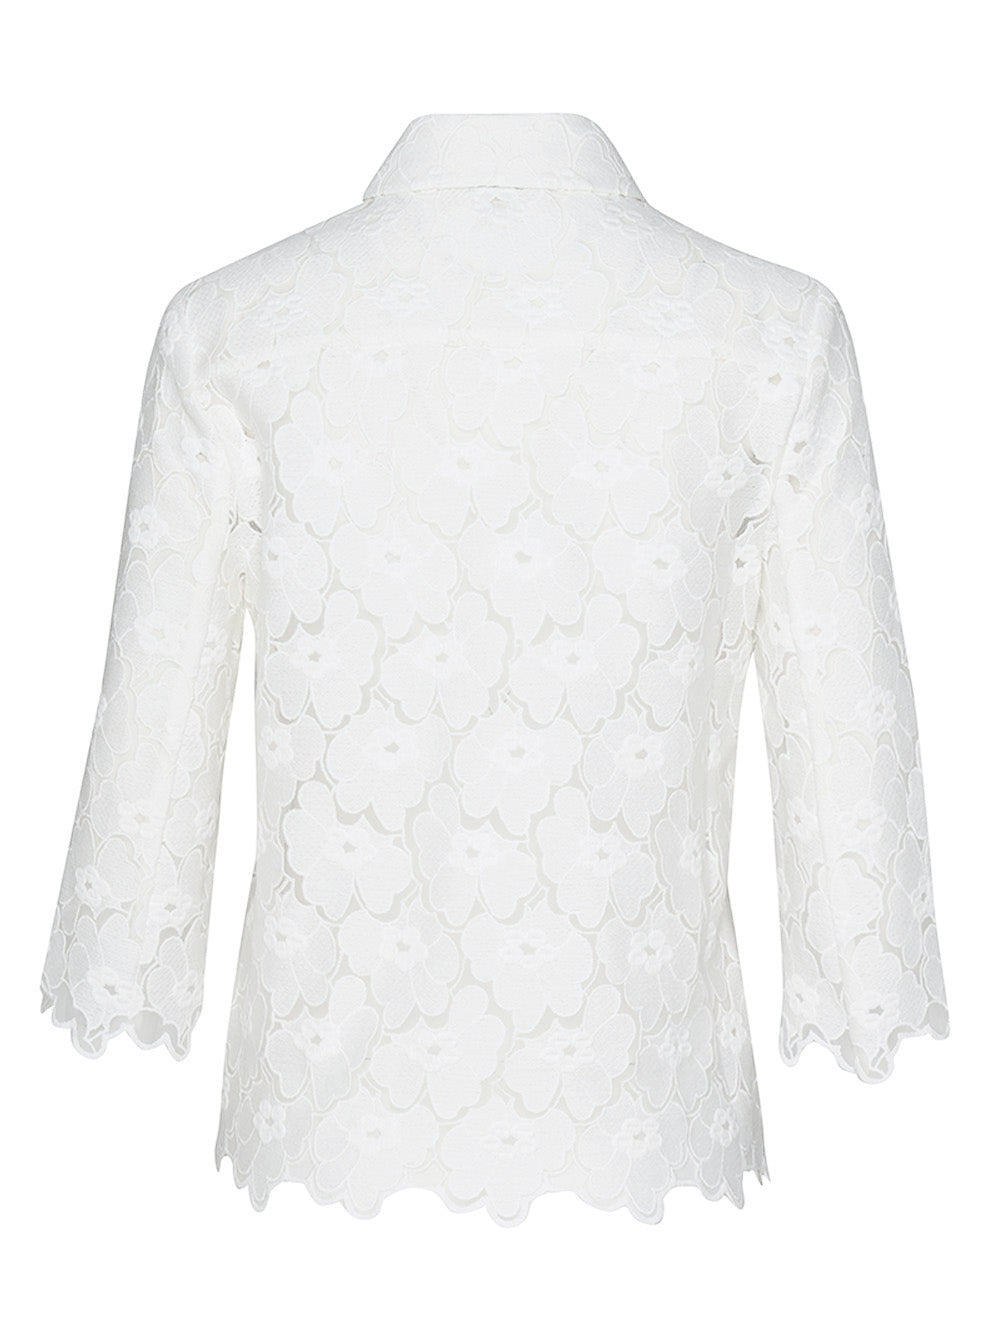       Club21-Collection-Floral-Lace-Patch-Shirt-White-2